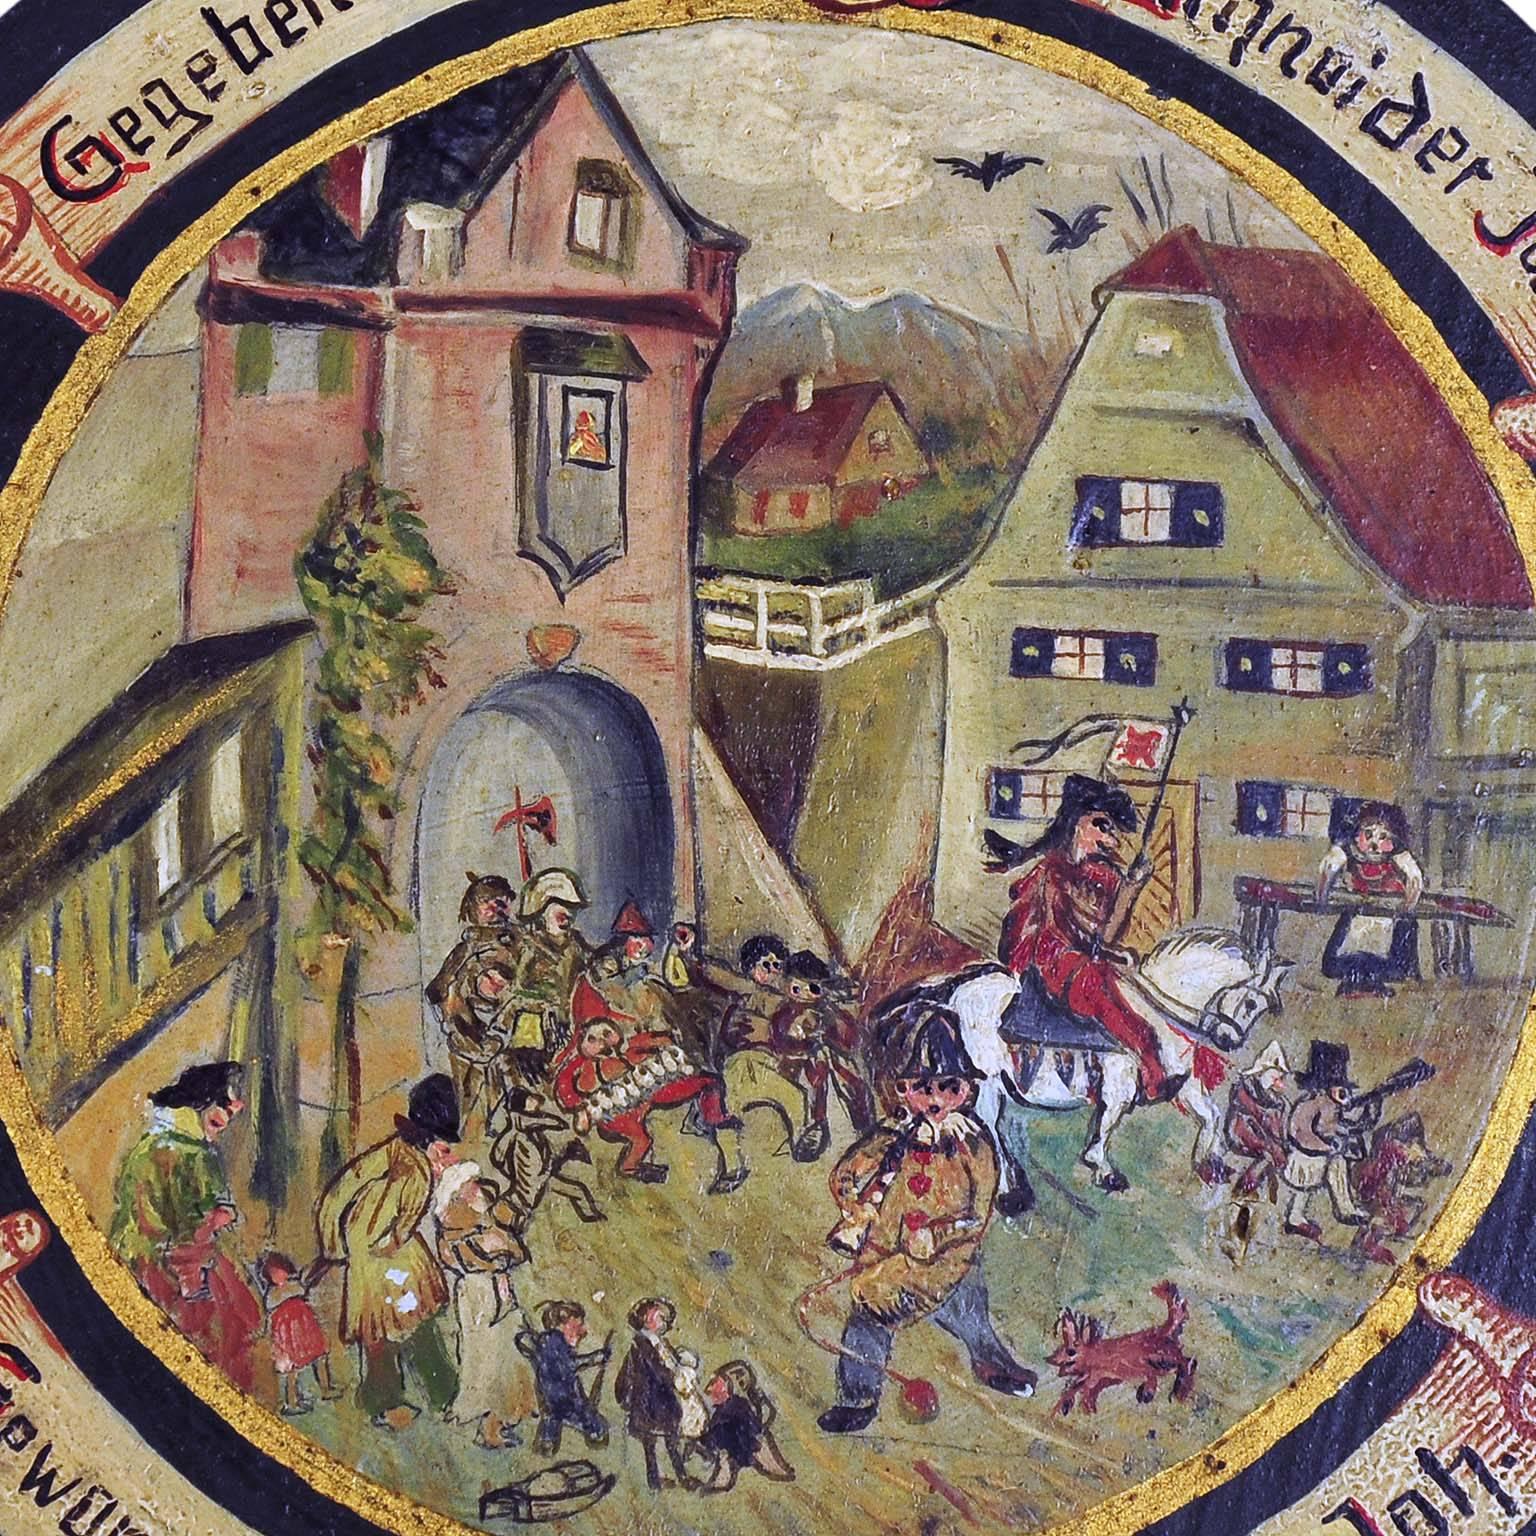 A rare hand-painted antique shooting target depicting a folksy village live scene. Oil on wood, hand-painted in naive painting style. Bavaria, circa 1920. On the base with impacts of the shooting. On the back handwritten list of the participants of